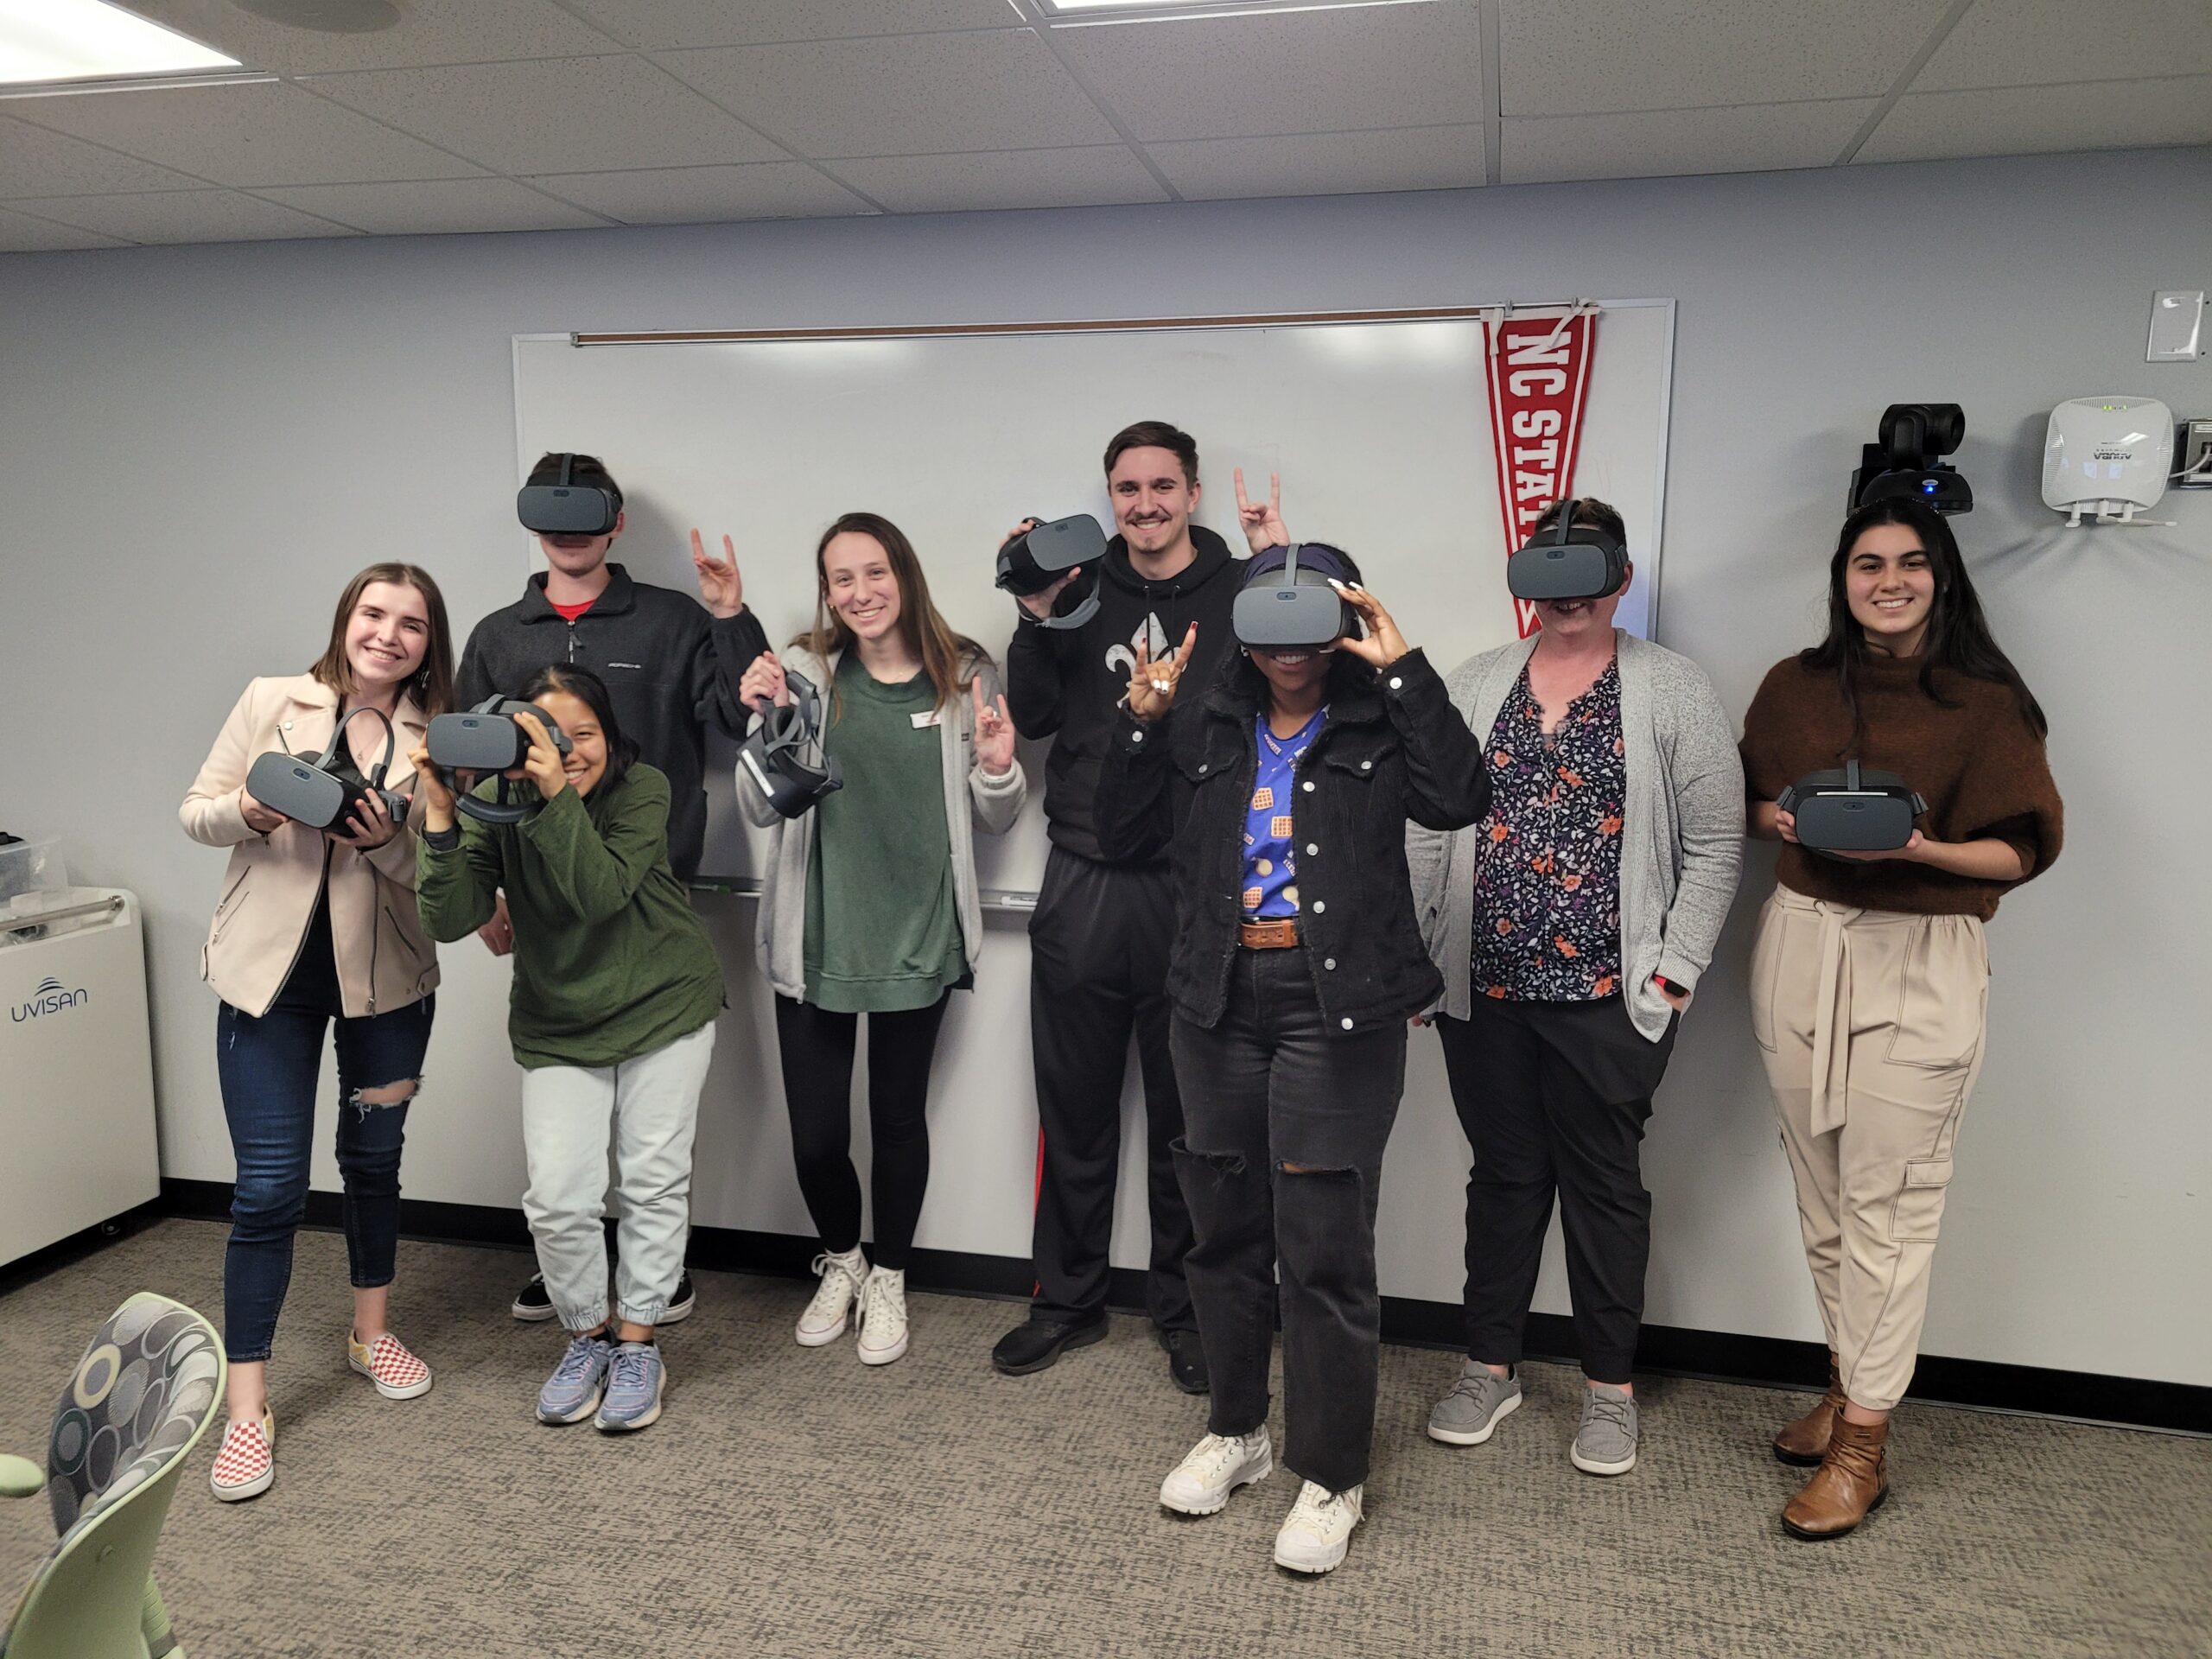 students with pico vr headsets